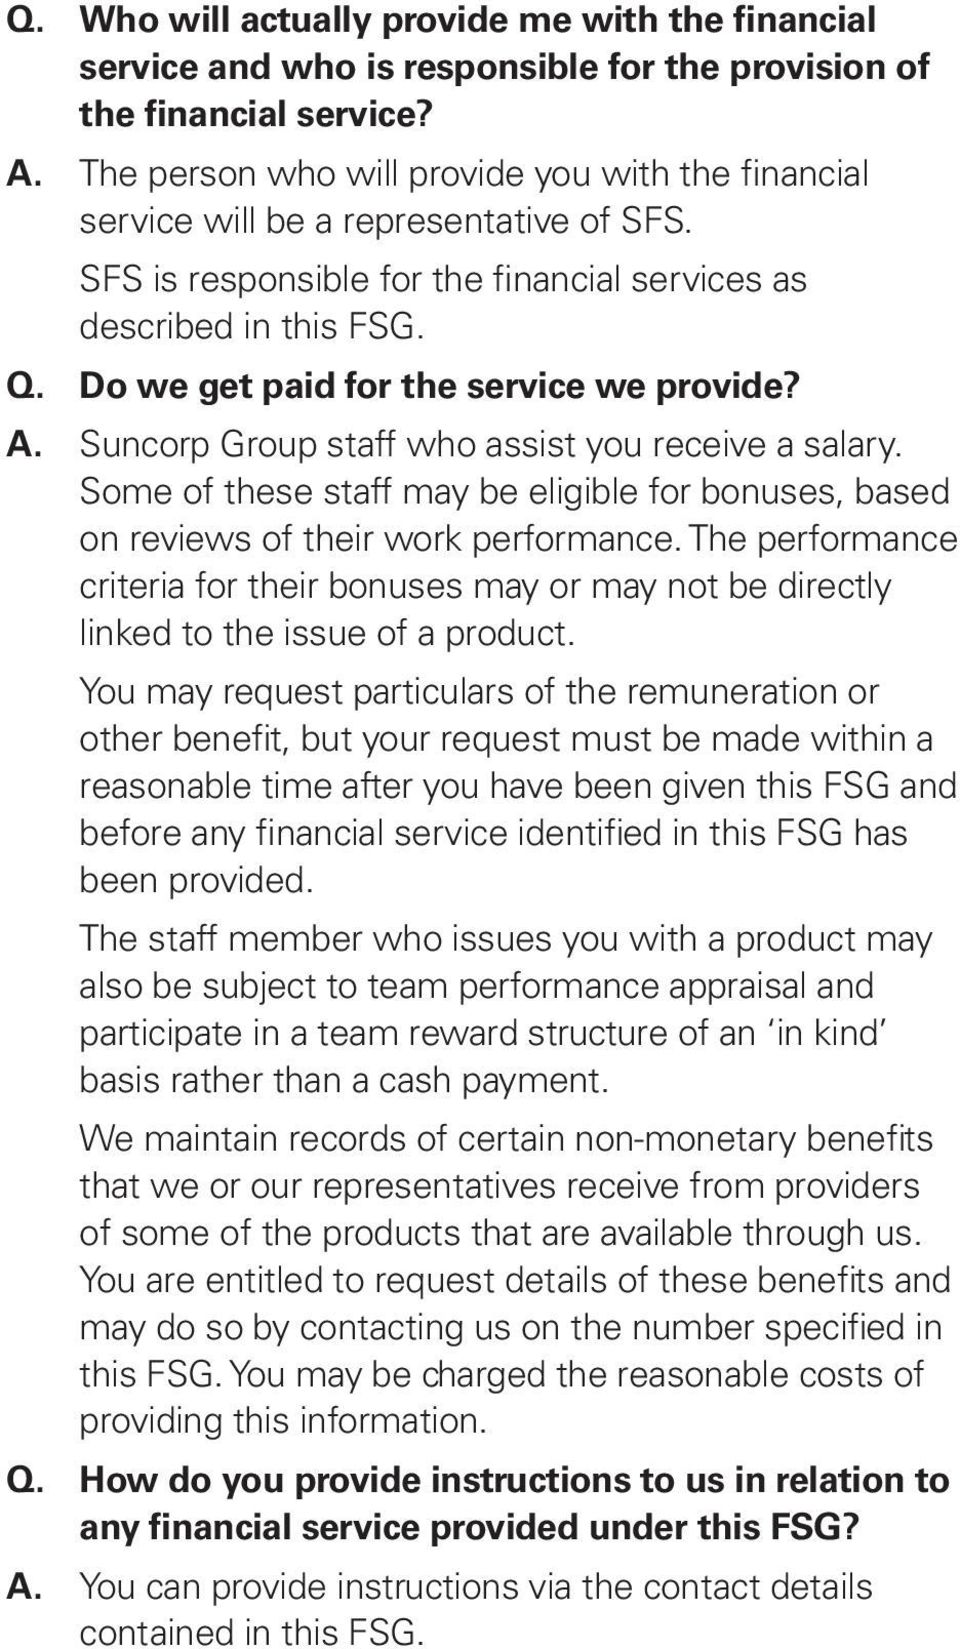 Do we get paid for the service we provide? A. Suncorp Group staff who assist you receive a salary. Some of these staff may be eligible for bonuses, based on reviews of their work performance.